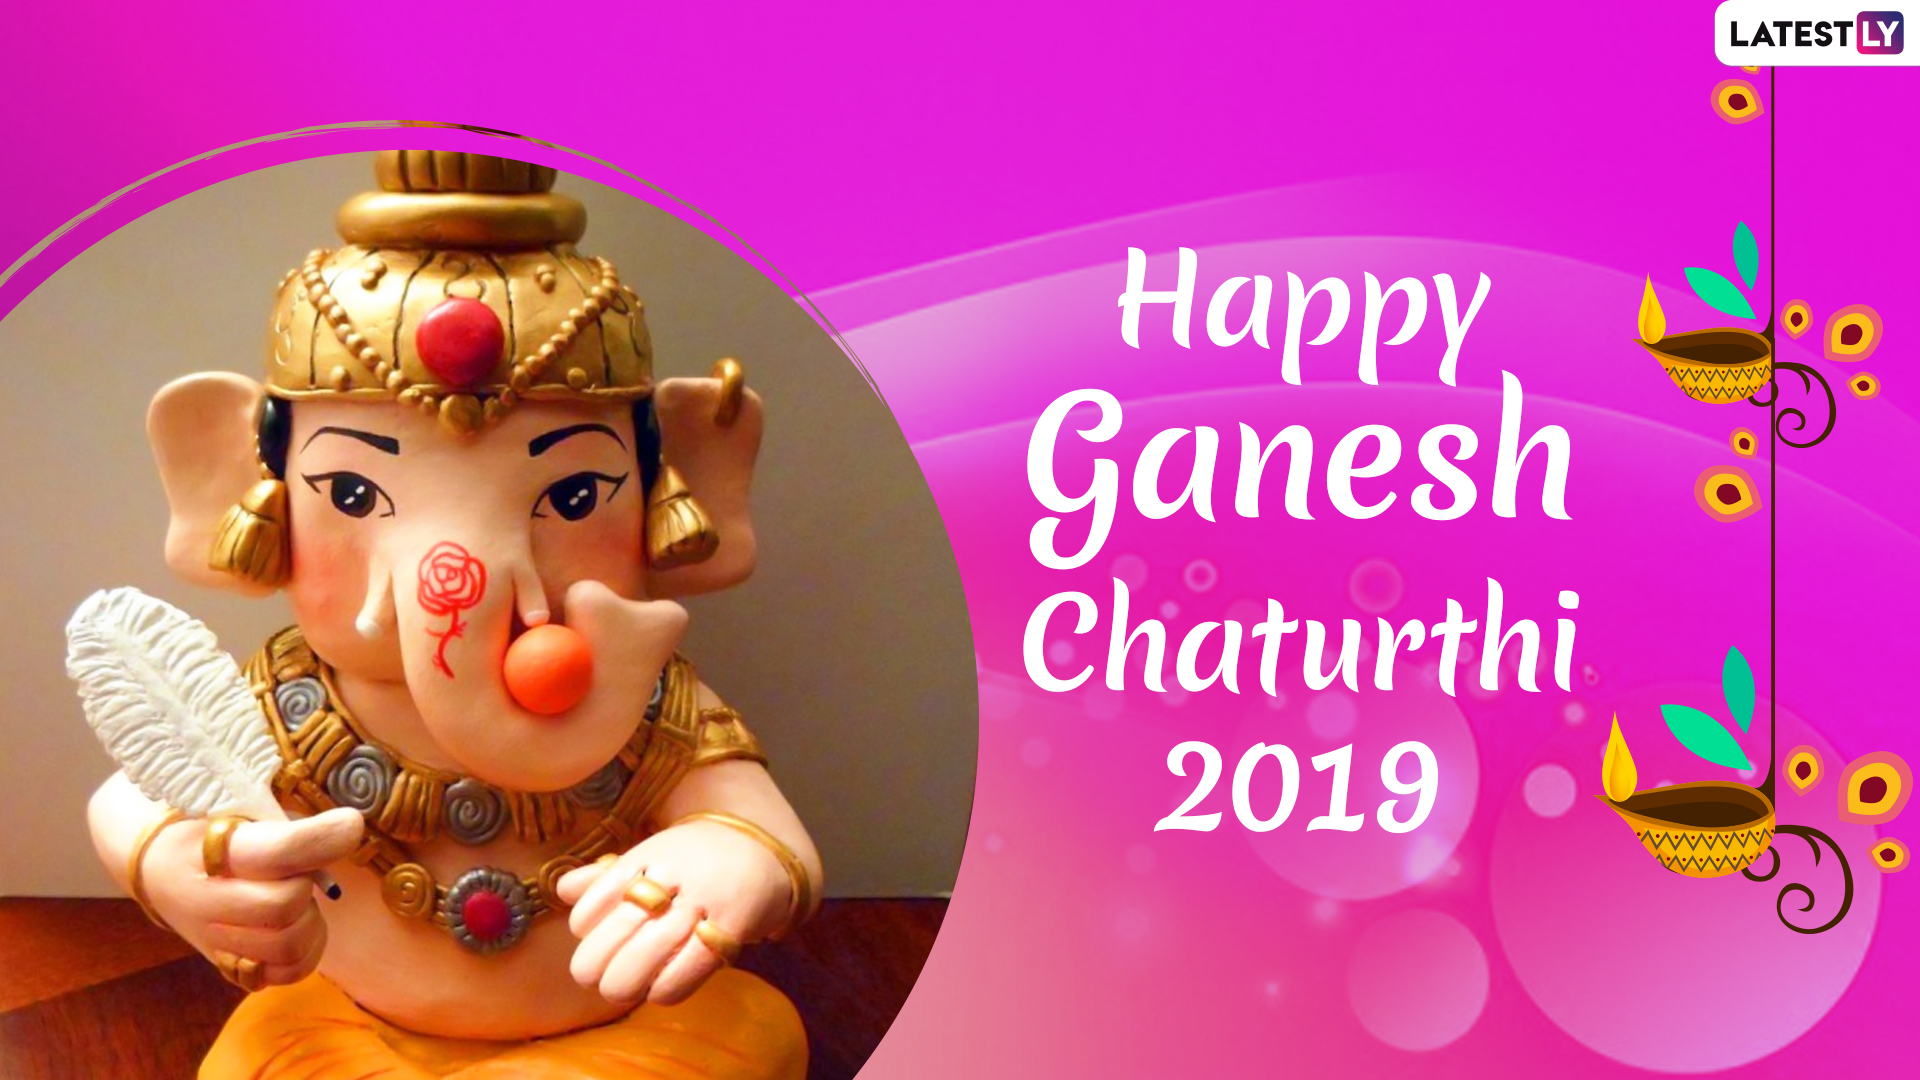 Ganesh Chaturthi Images & HD Wallpapers for Free Download Online: Wish Happy  Ganeshotsav 2019 With Bal Ganpati Photos, GIF Greetings & WhatsApp Sticker  Messages | 🙏🏻 LatestLY